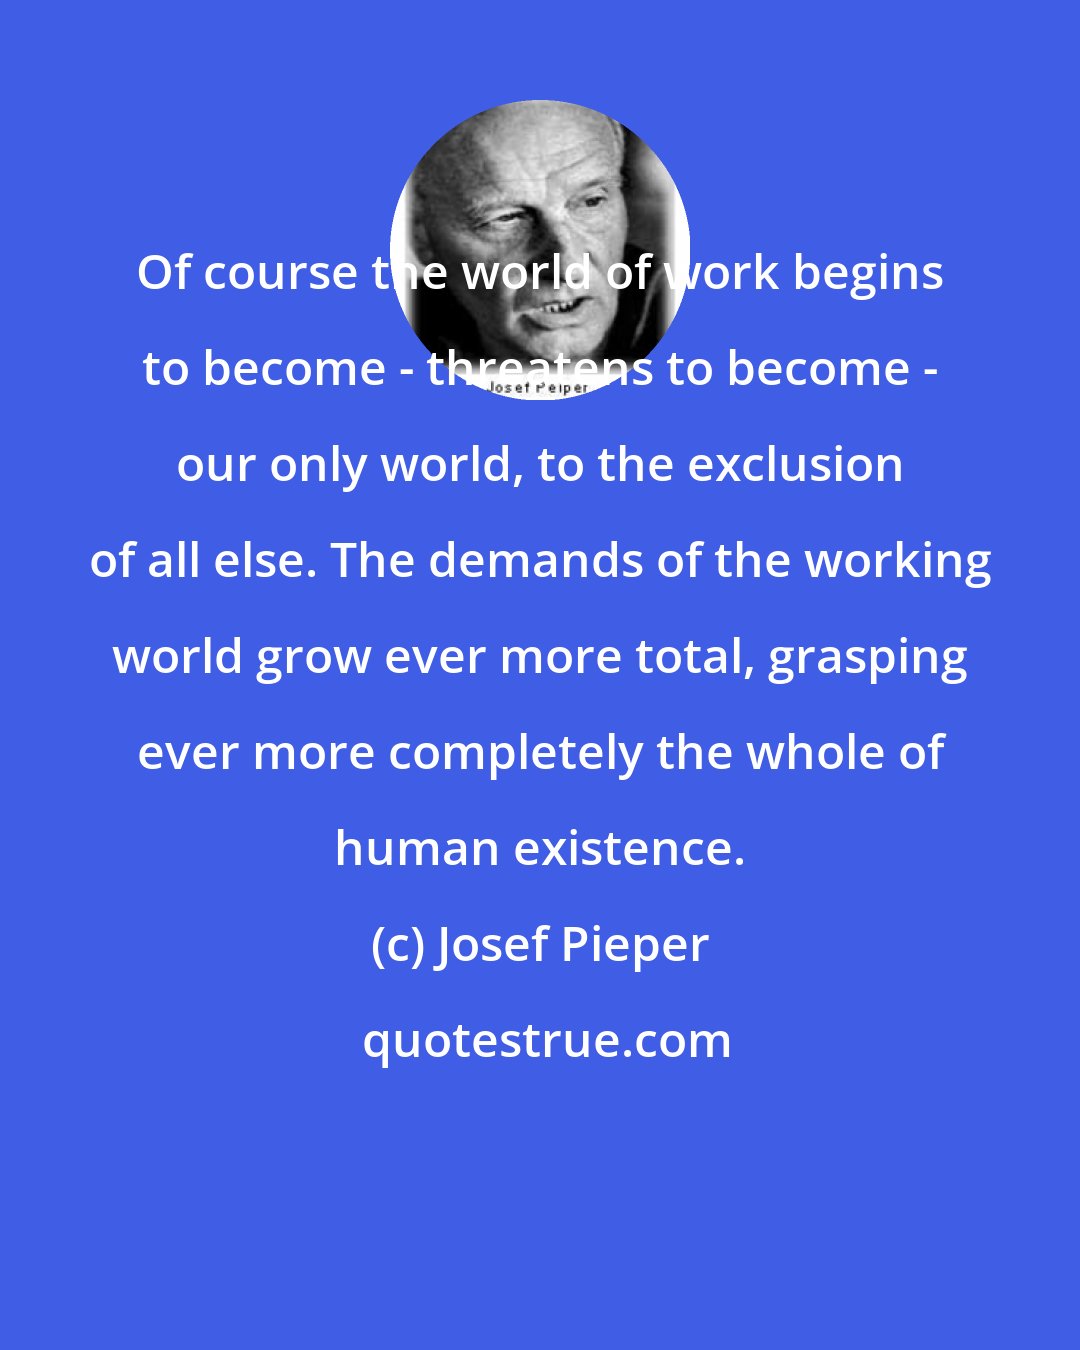 Josef Pieper: Of course the world of work begins to become - threatens to become - our only world, to the exclusion of all else. The demands of the working world grow ever more total, grasping ever more completely the whole of human existence.